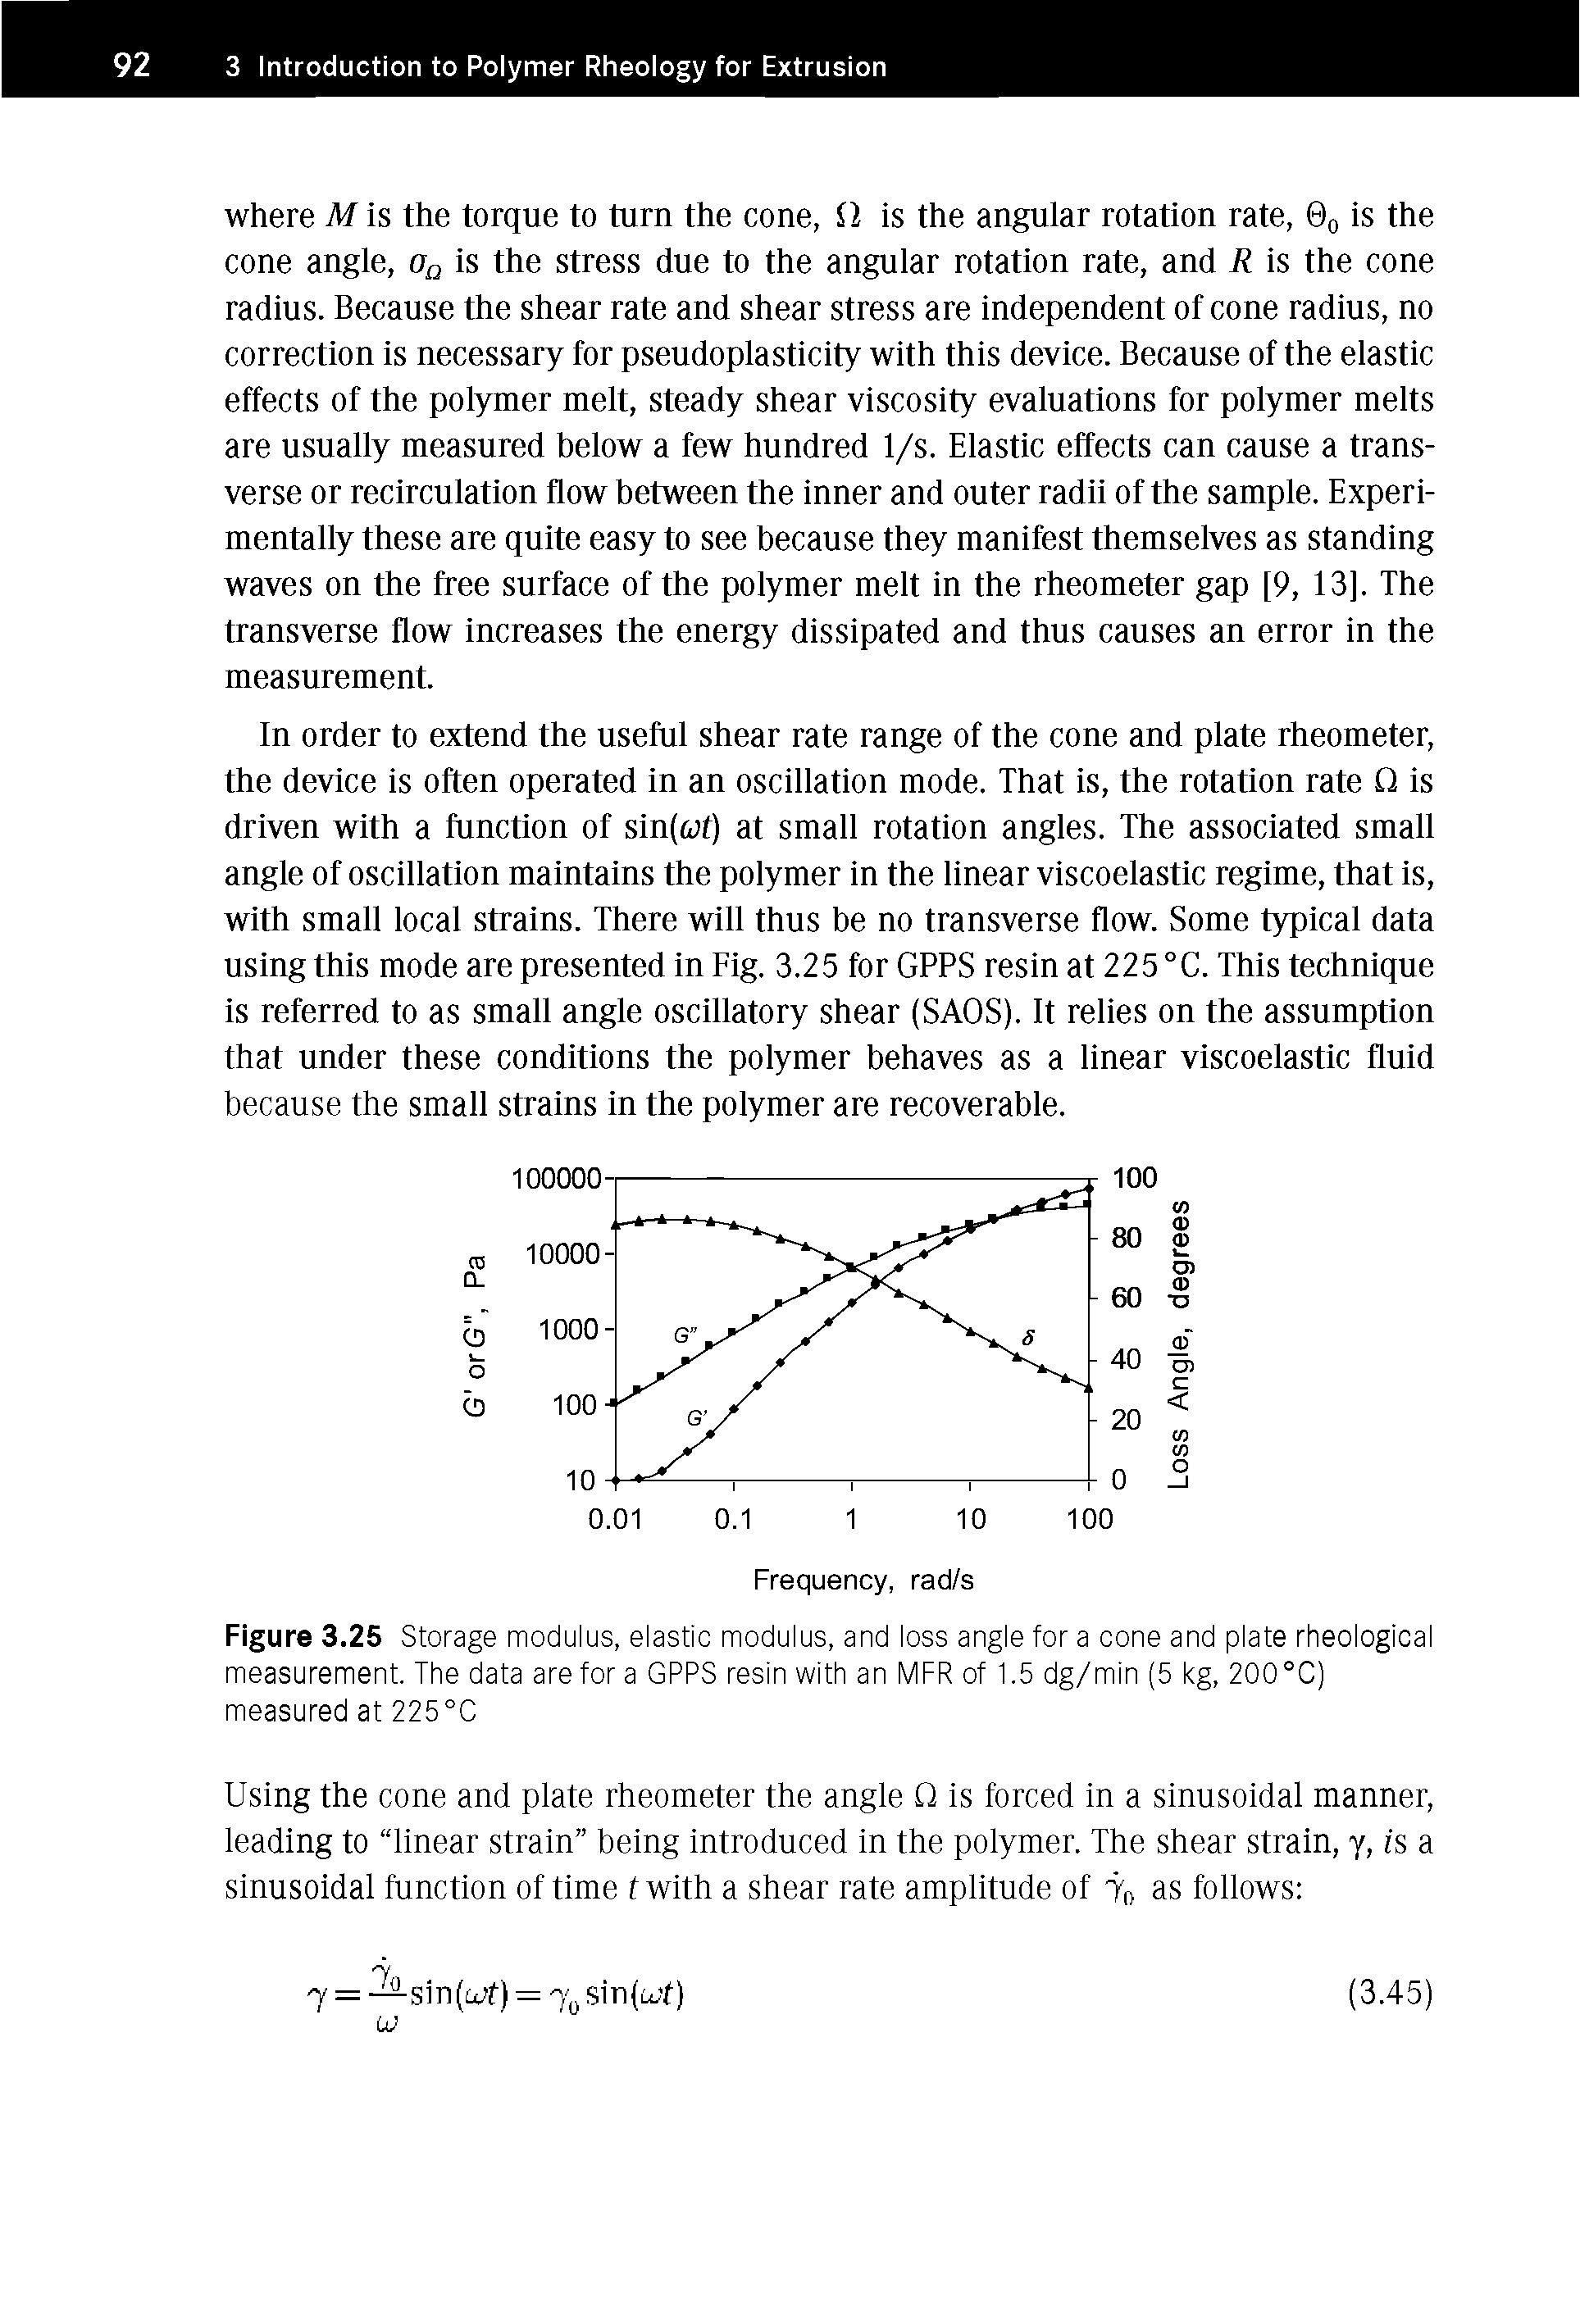 Figure 3.25 Storage modulus, elastic modulus, and loss angle for a cone and plate rheological measurement. The data are for a GPPS resin with an MFR of 1.5 dg/min (5 kg, 200°C) measured at 225°C...